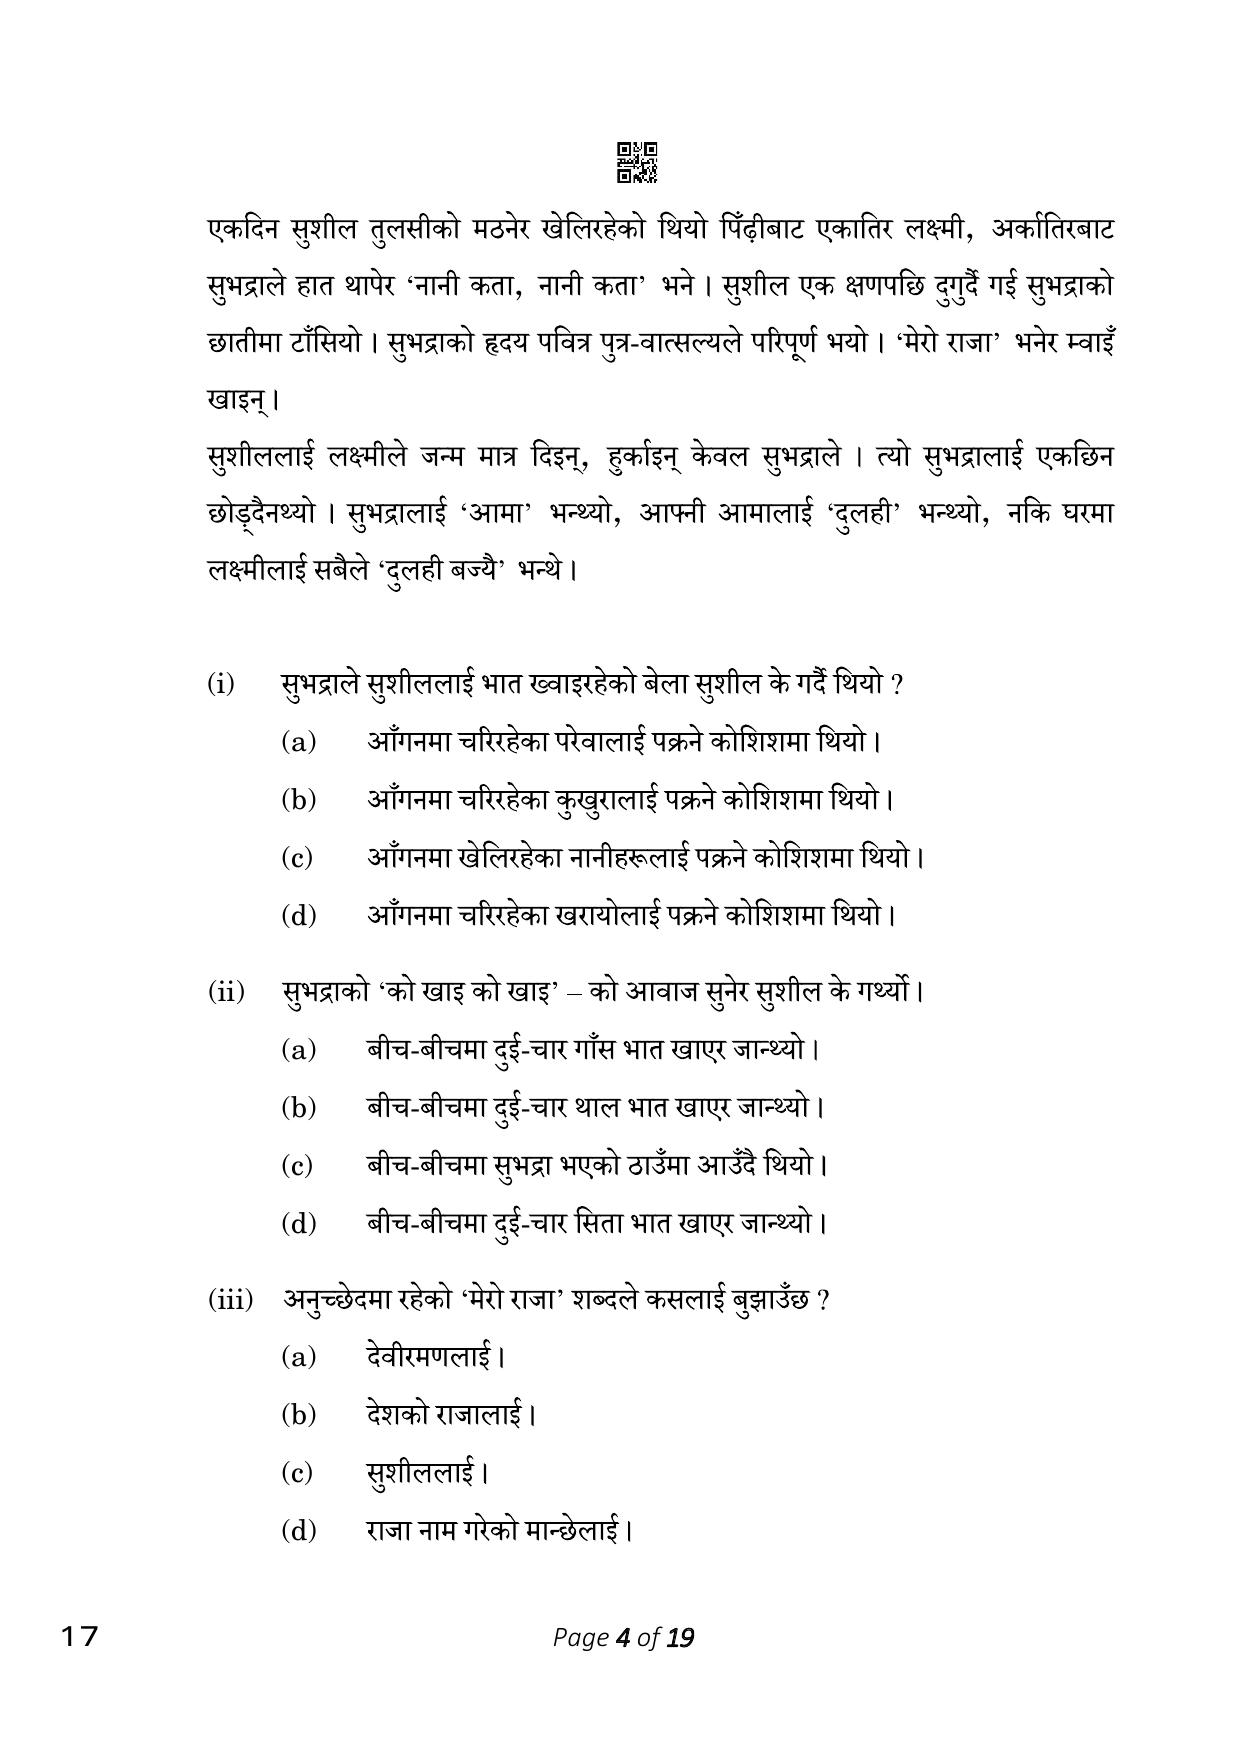 CBSE Class 10 Nepali (Compartment) 2023 Question Paper - Page 4